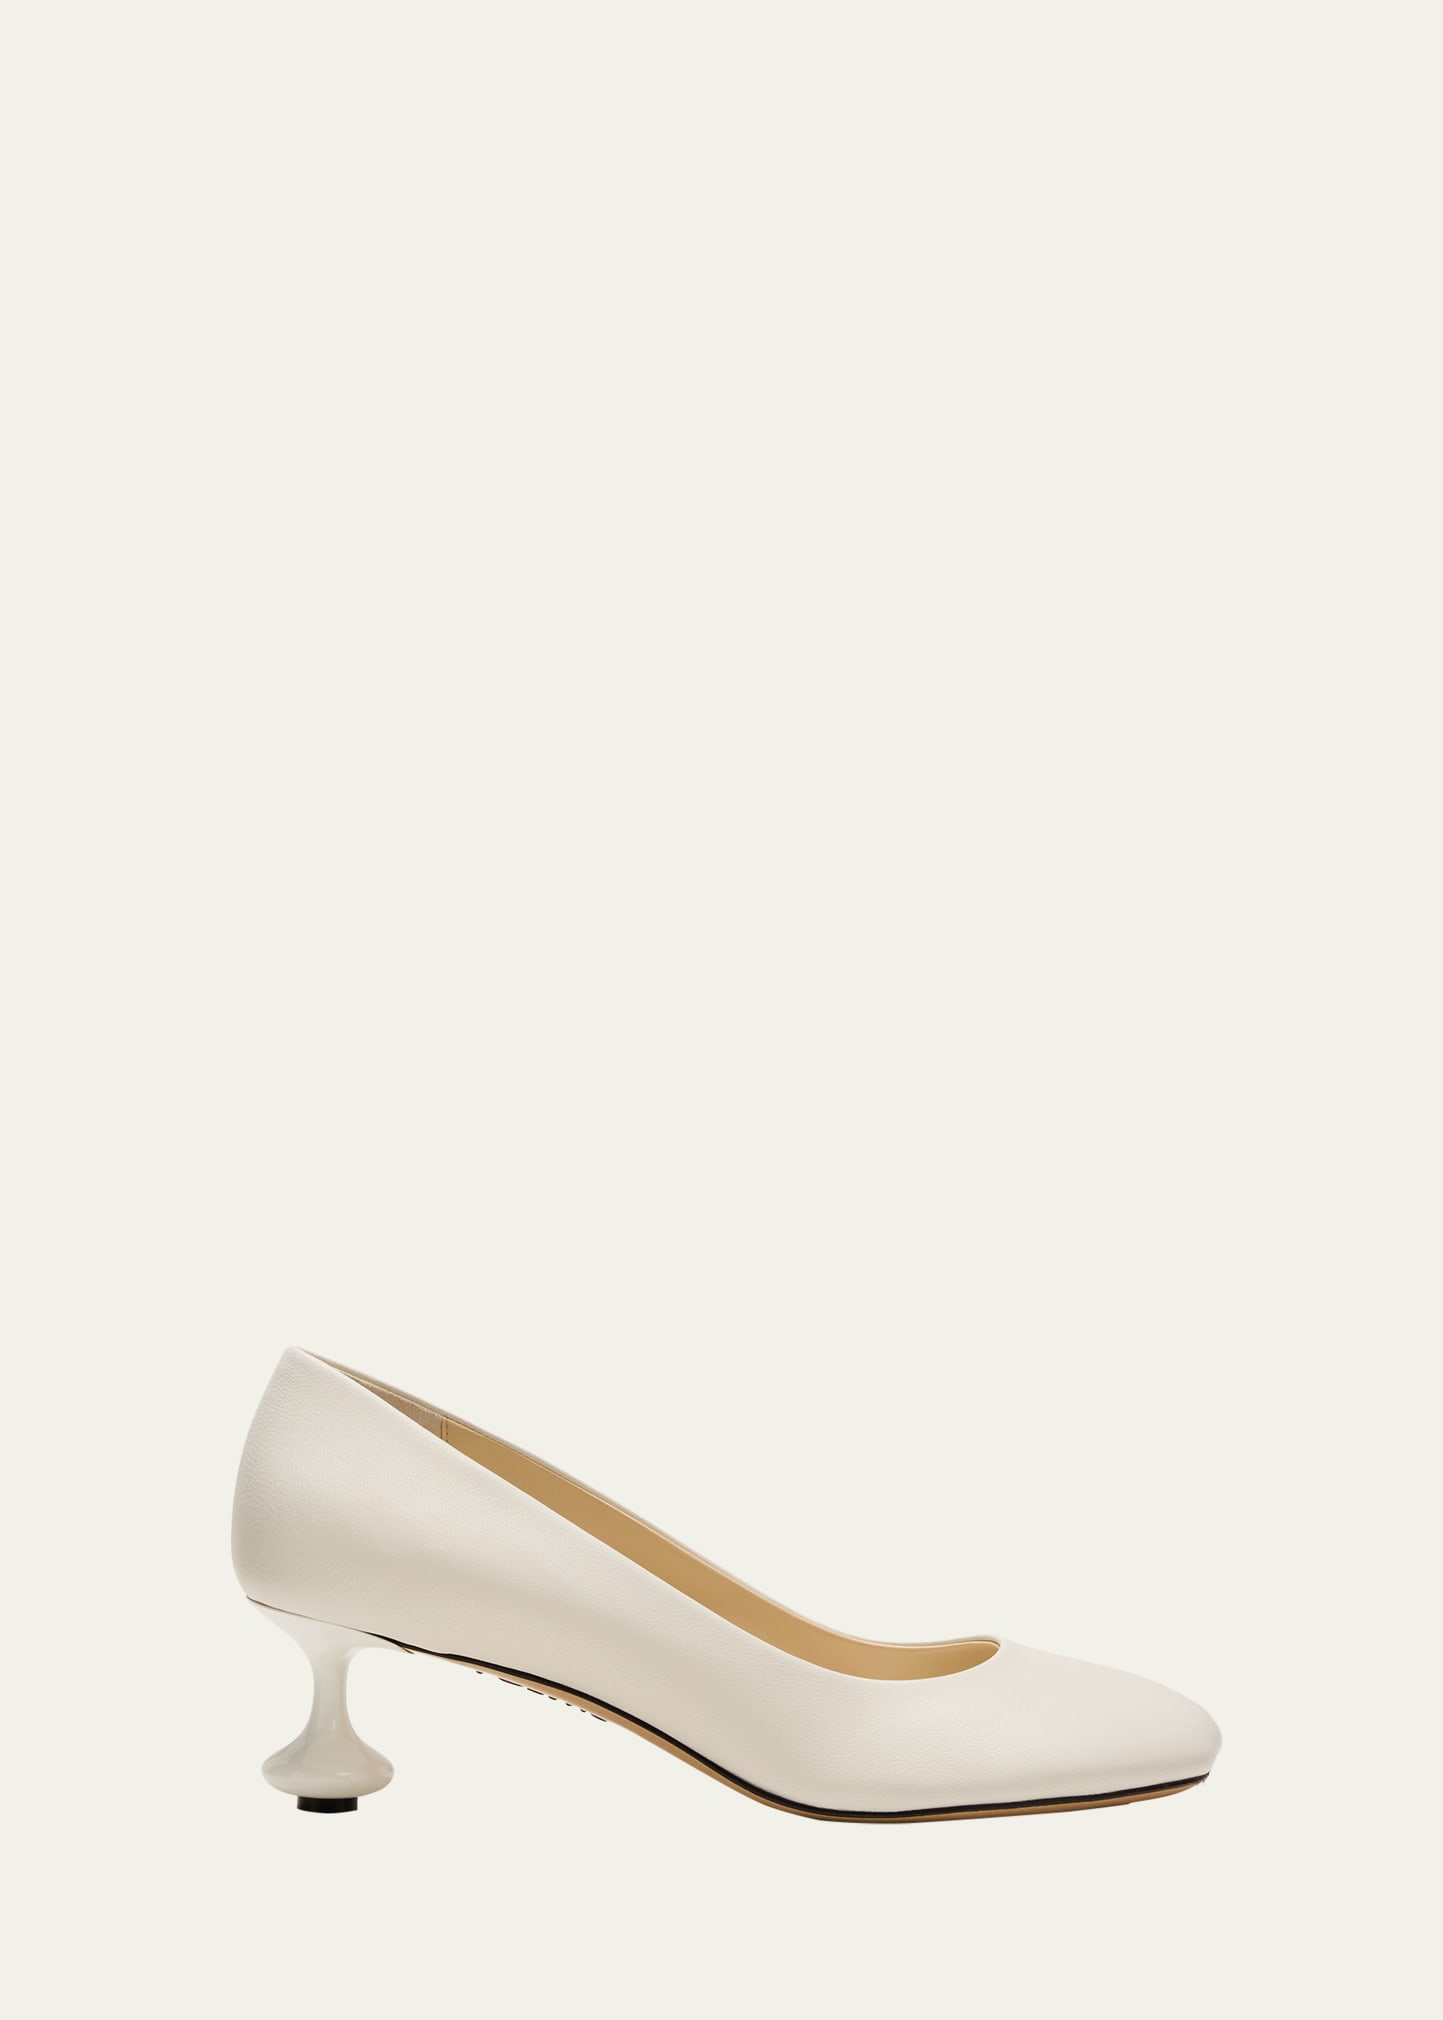 Loewe Toy Leather Stiletto Pumps In White